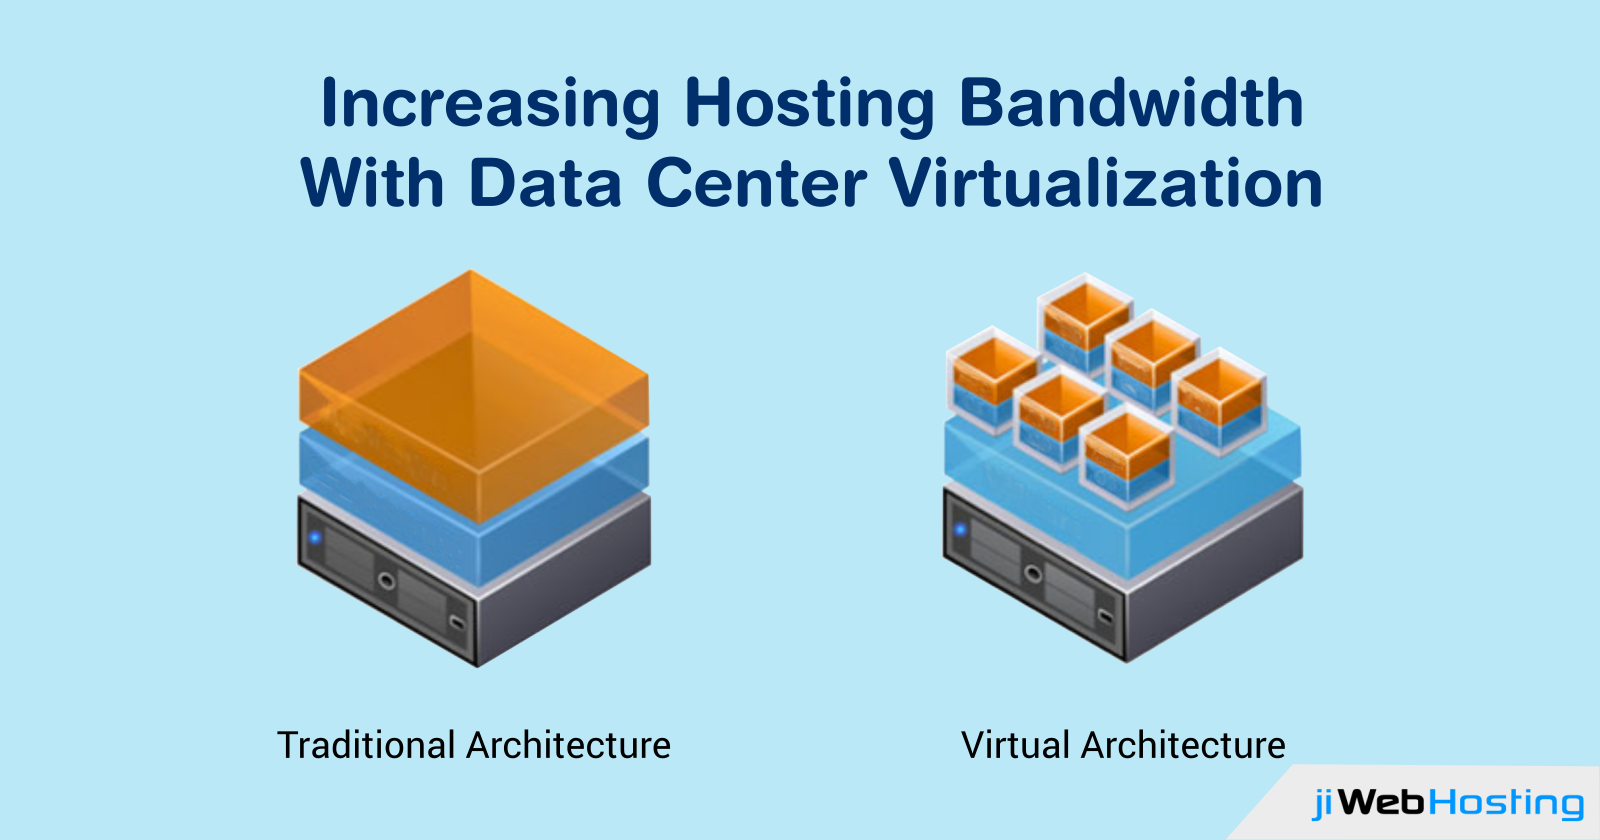 Increasing Hosting Bandwidth by Employing Data Center Virtualization Techniques at Servers